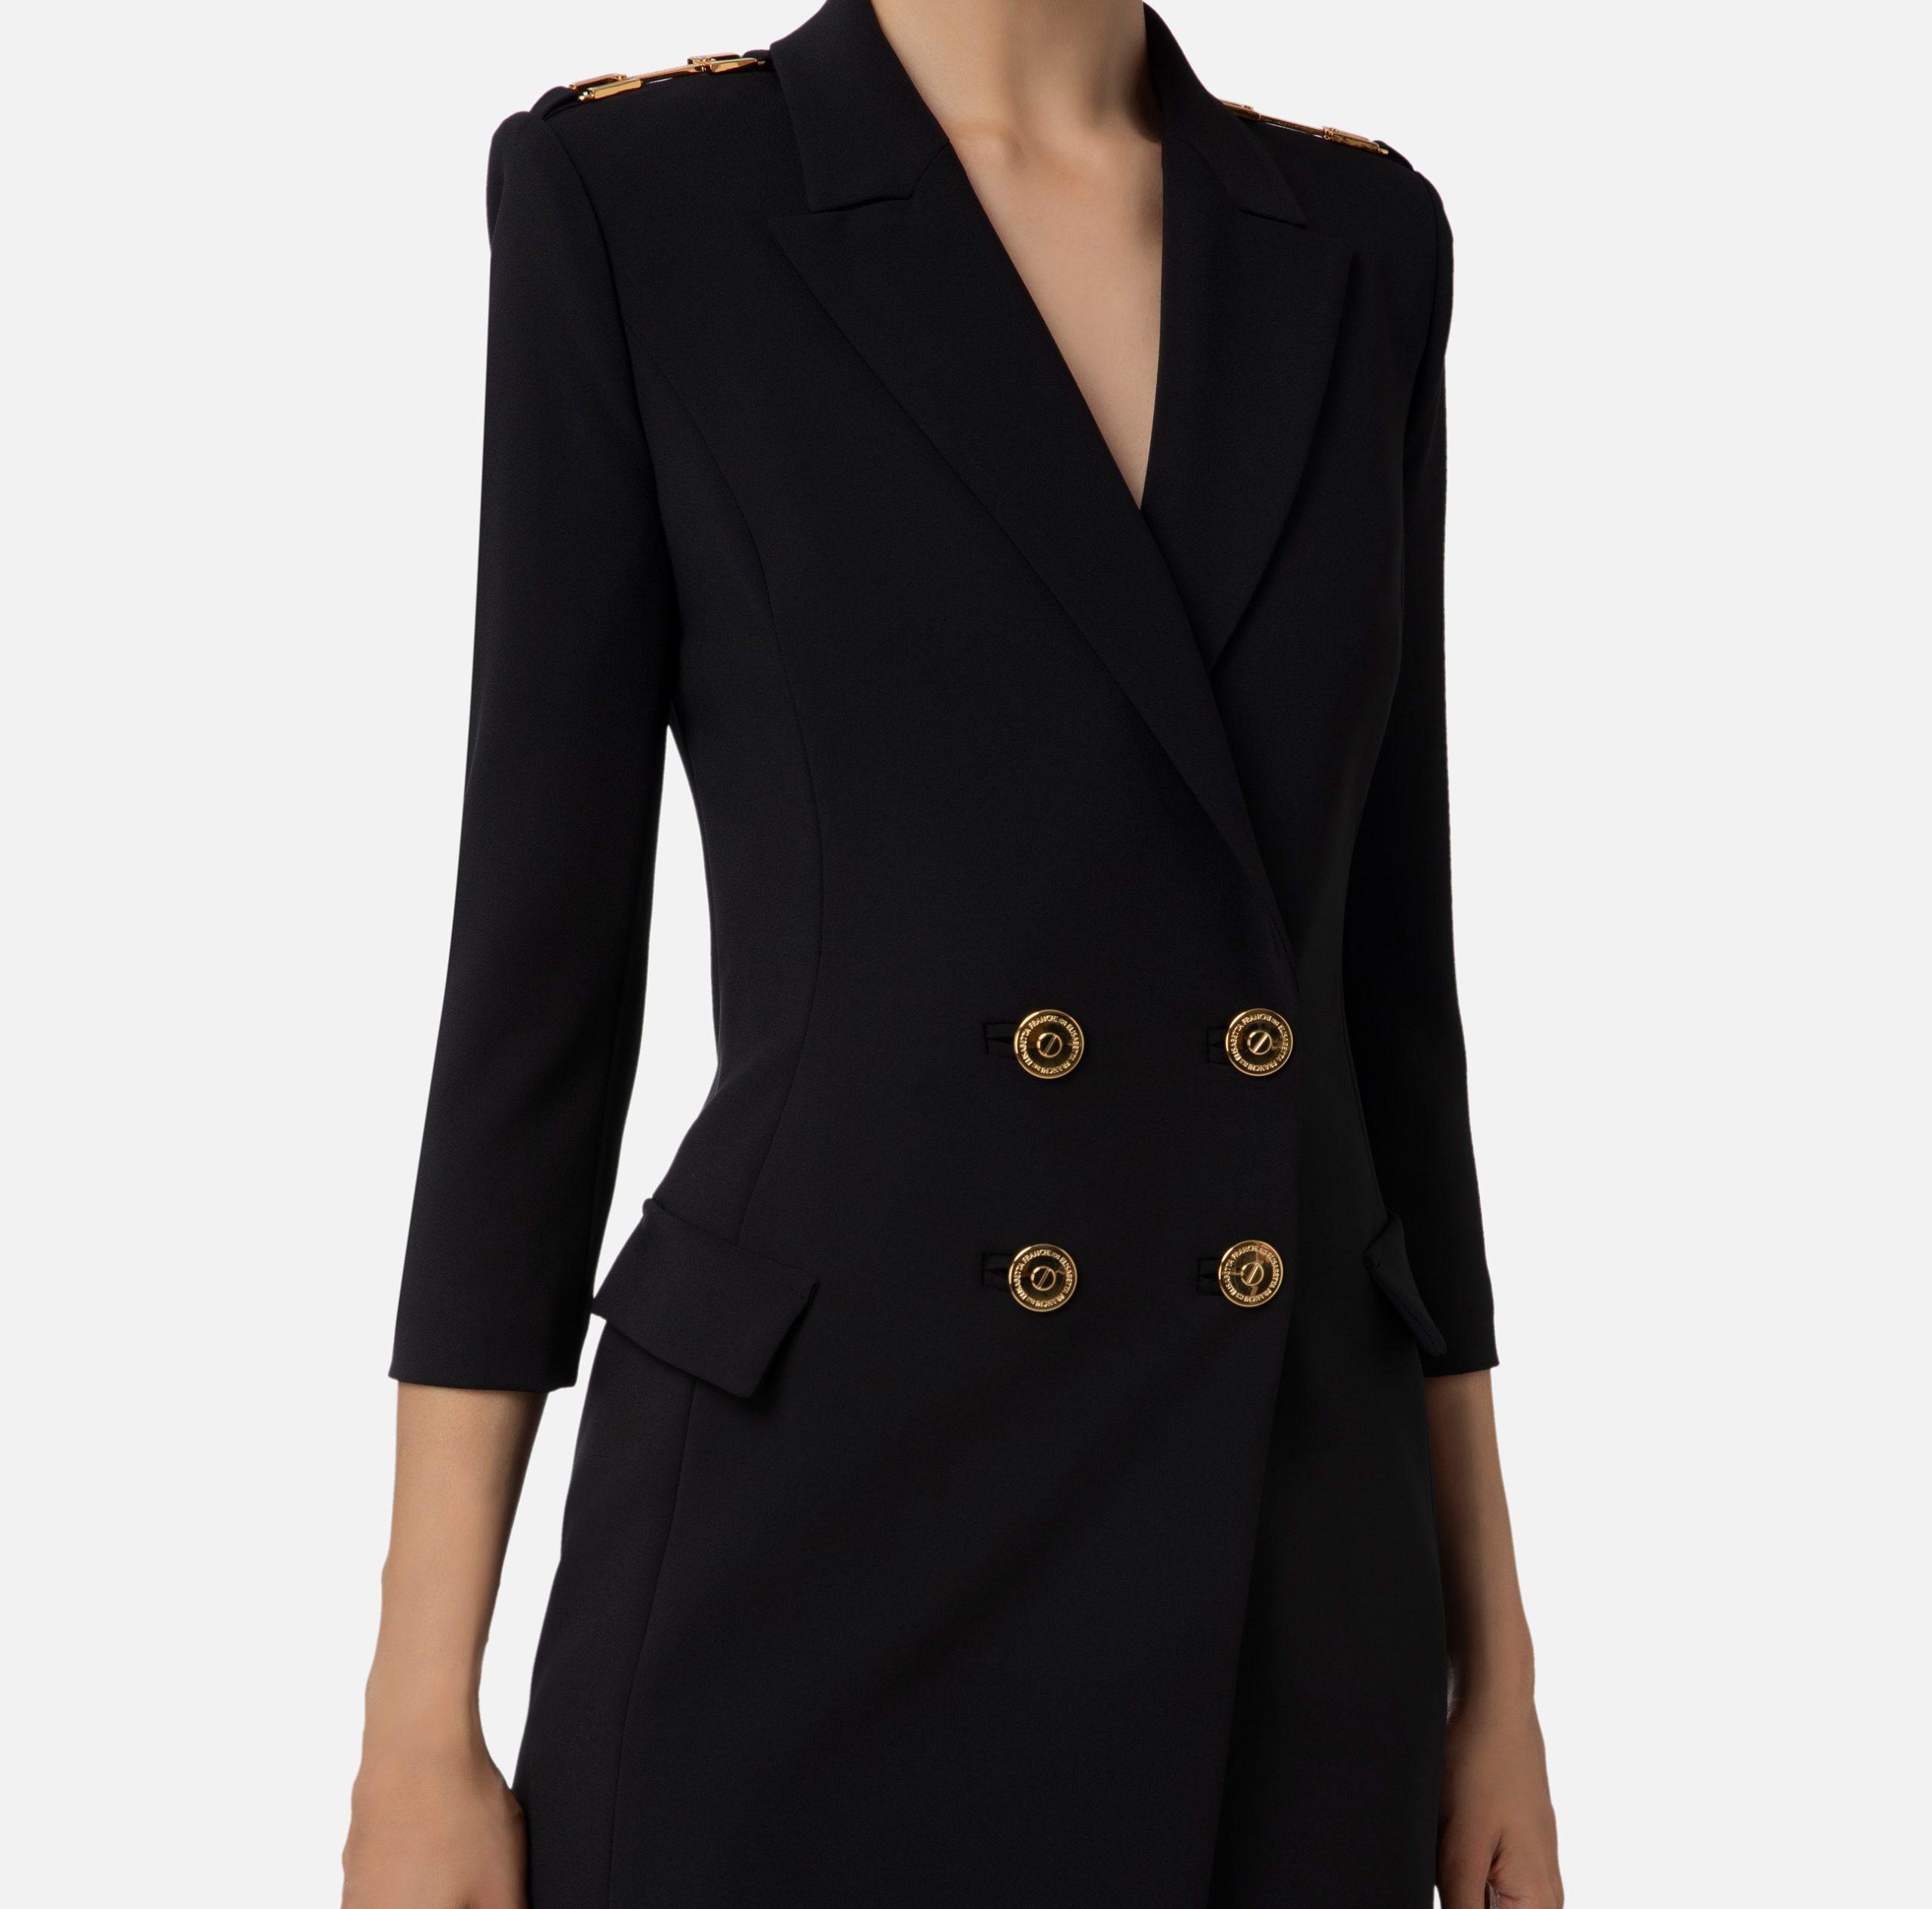 ELISABETTA FRANCHI AB41736E2 Coat dress in crêpe fabric with flashes